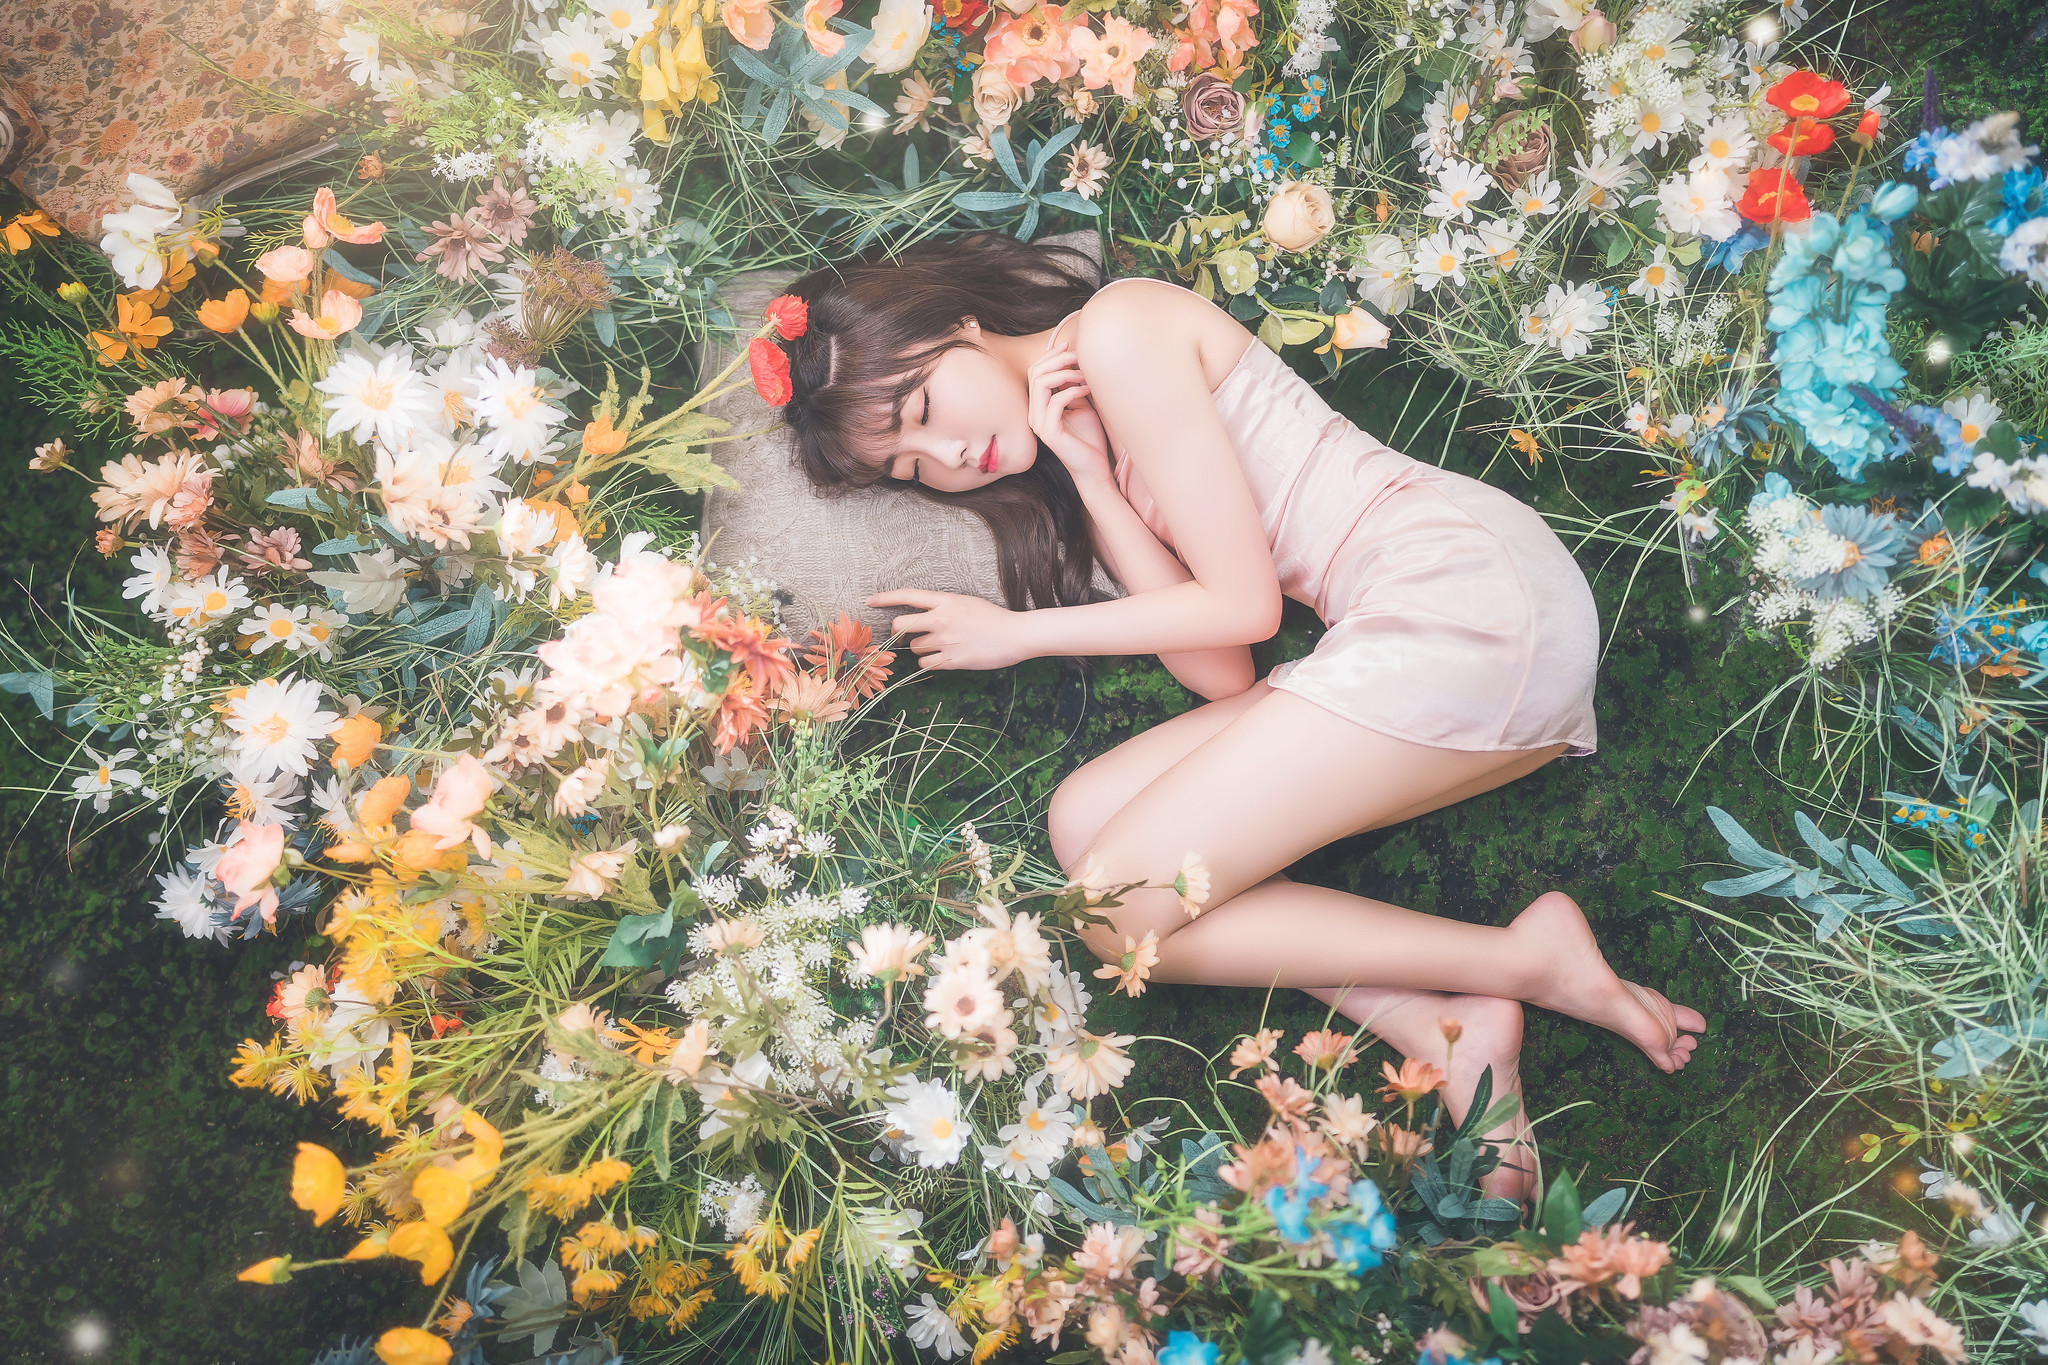 People 2048x1365 Sexy Funk Pig women Asian brunette closed eyes dress pink clothing sleeping barefoot flowers plants top view colorful model women outdoors